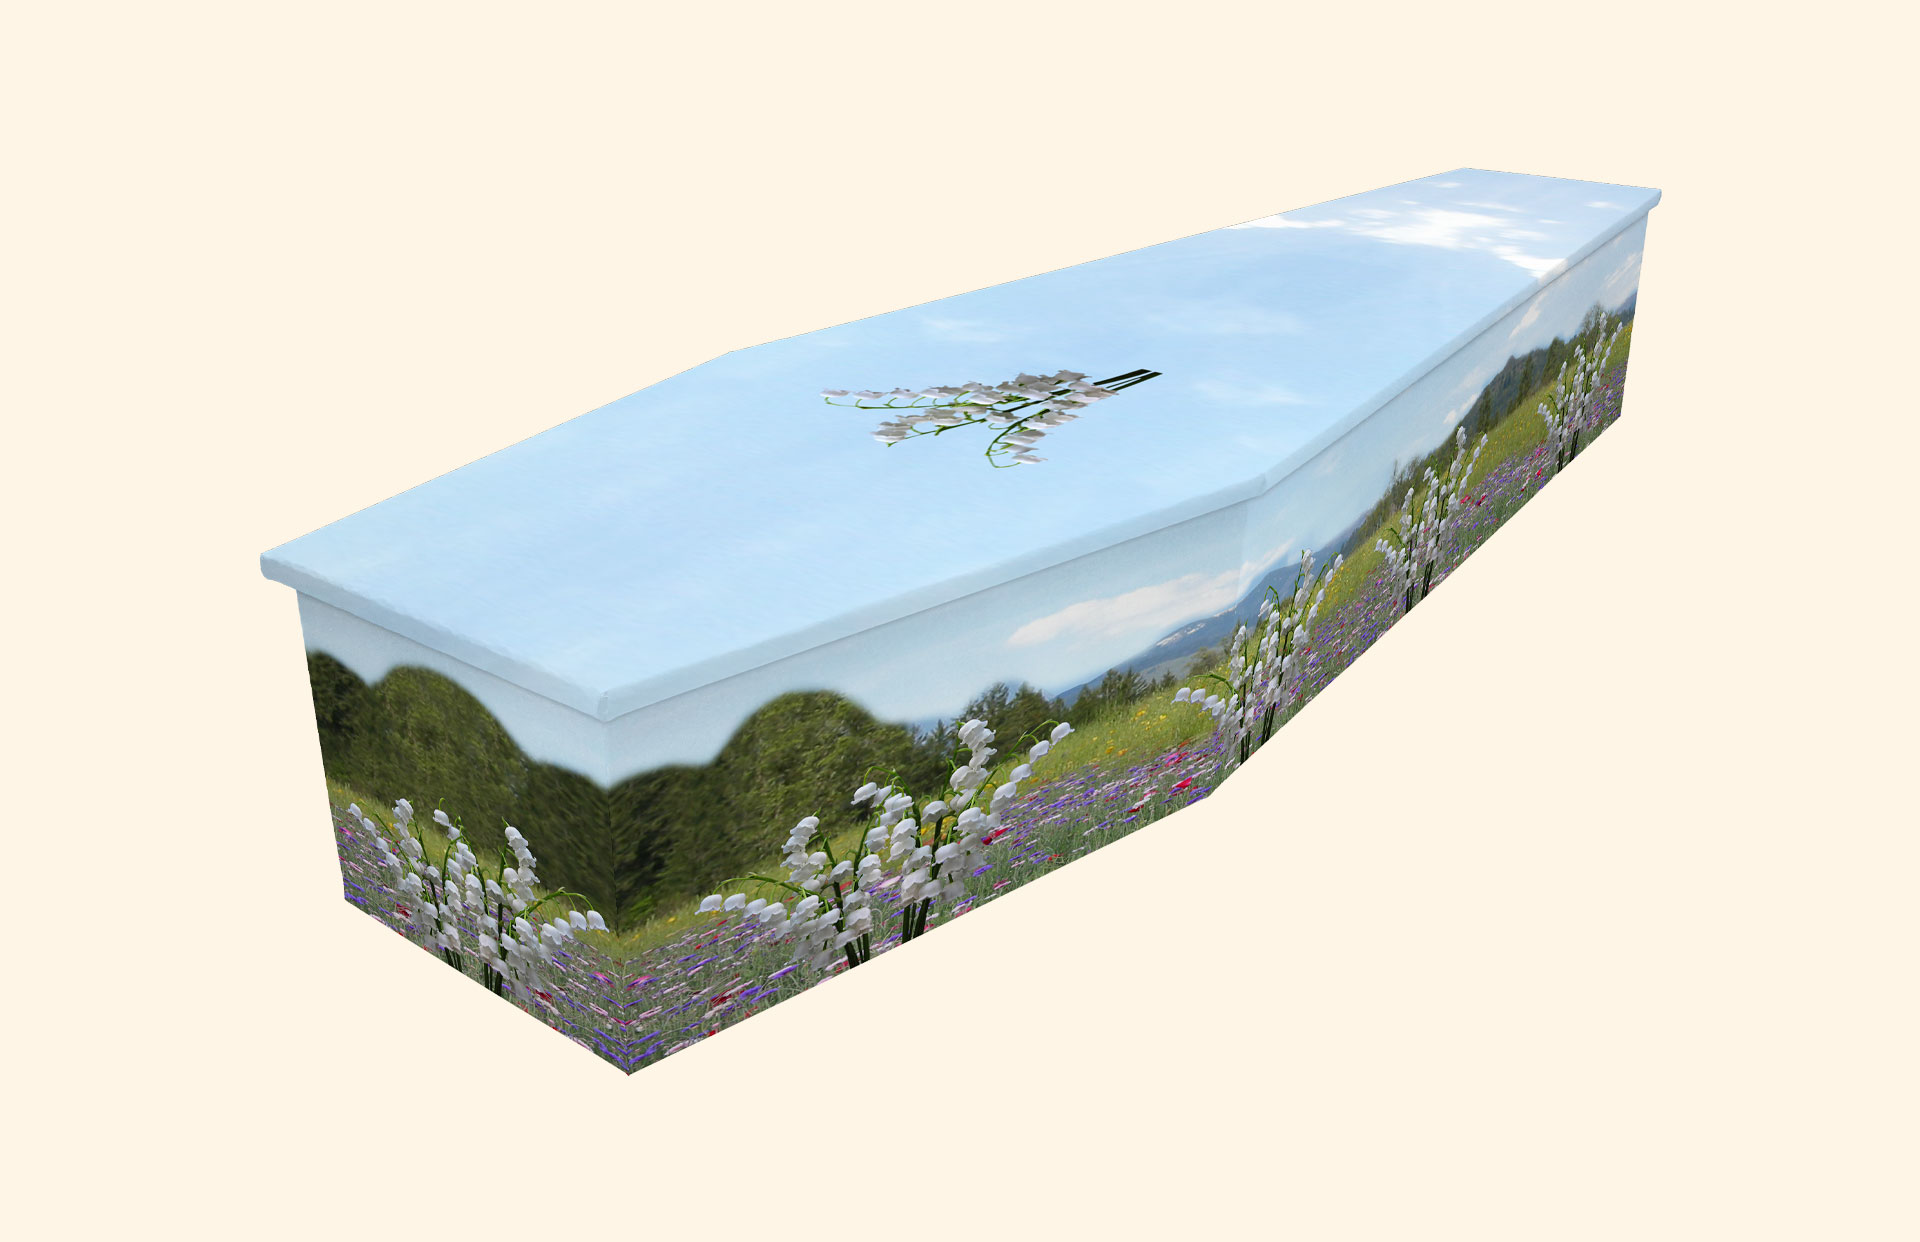 Lily of the Valley design on a cardboard coffin